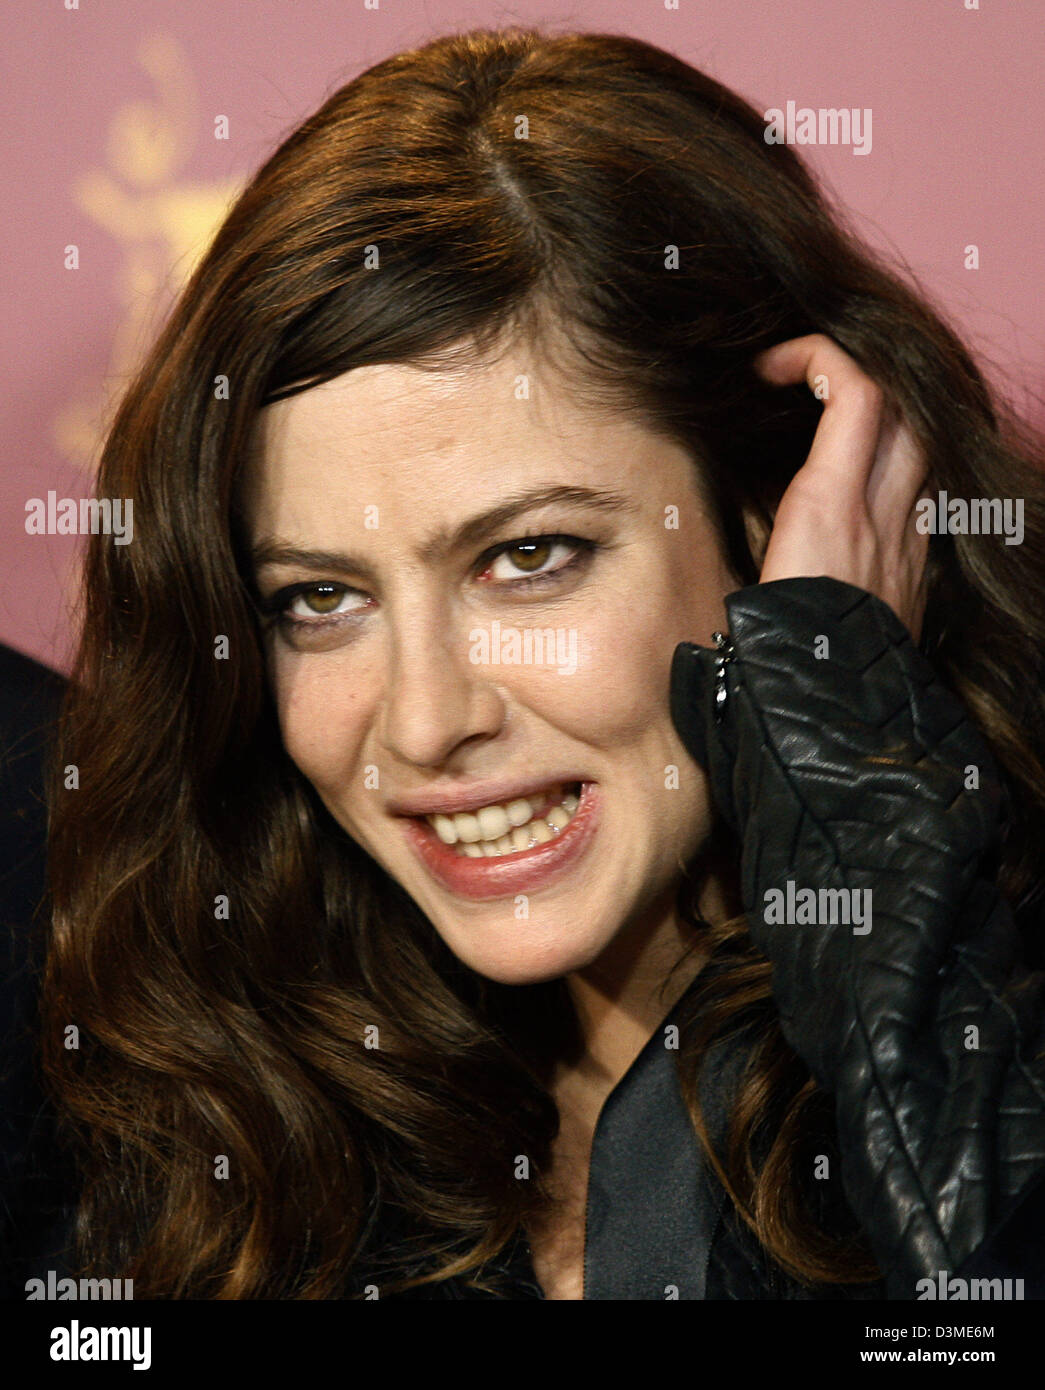 French actress Anna Mouglalis smiles as she attends a photocall for her new film  'Romanzo Criminale' (Crime Novel) at the 56th International Film Festival in Berlin, Wednesday, 15 February 2006. 'Romanzo Criminale' runs in comptition at this year's Berinale Film Festival which continues until 19 February 2006. Photo: Wolfgang Kumm Stock Photo